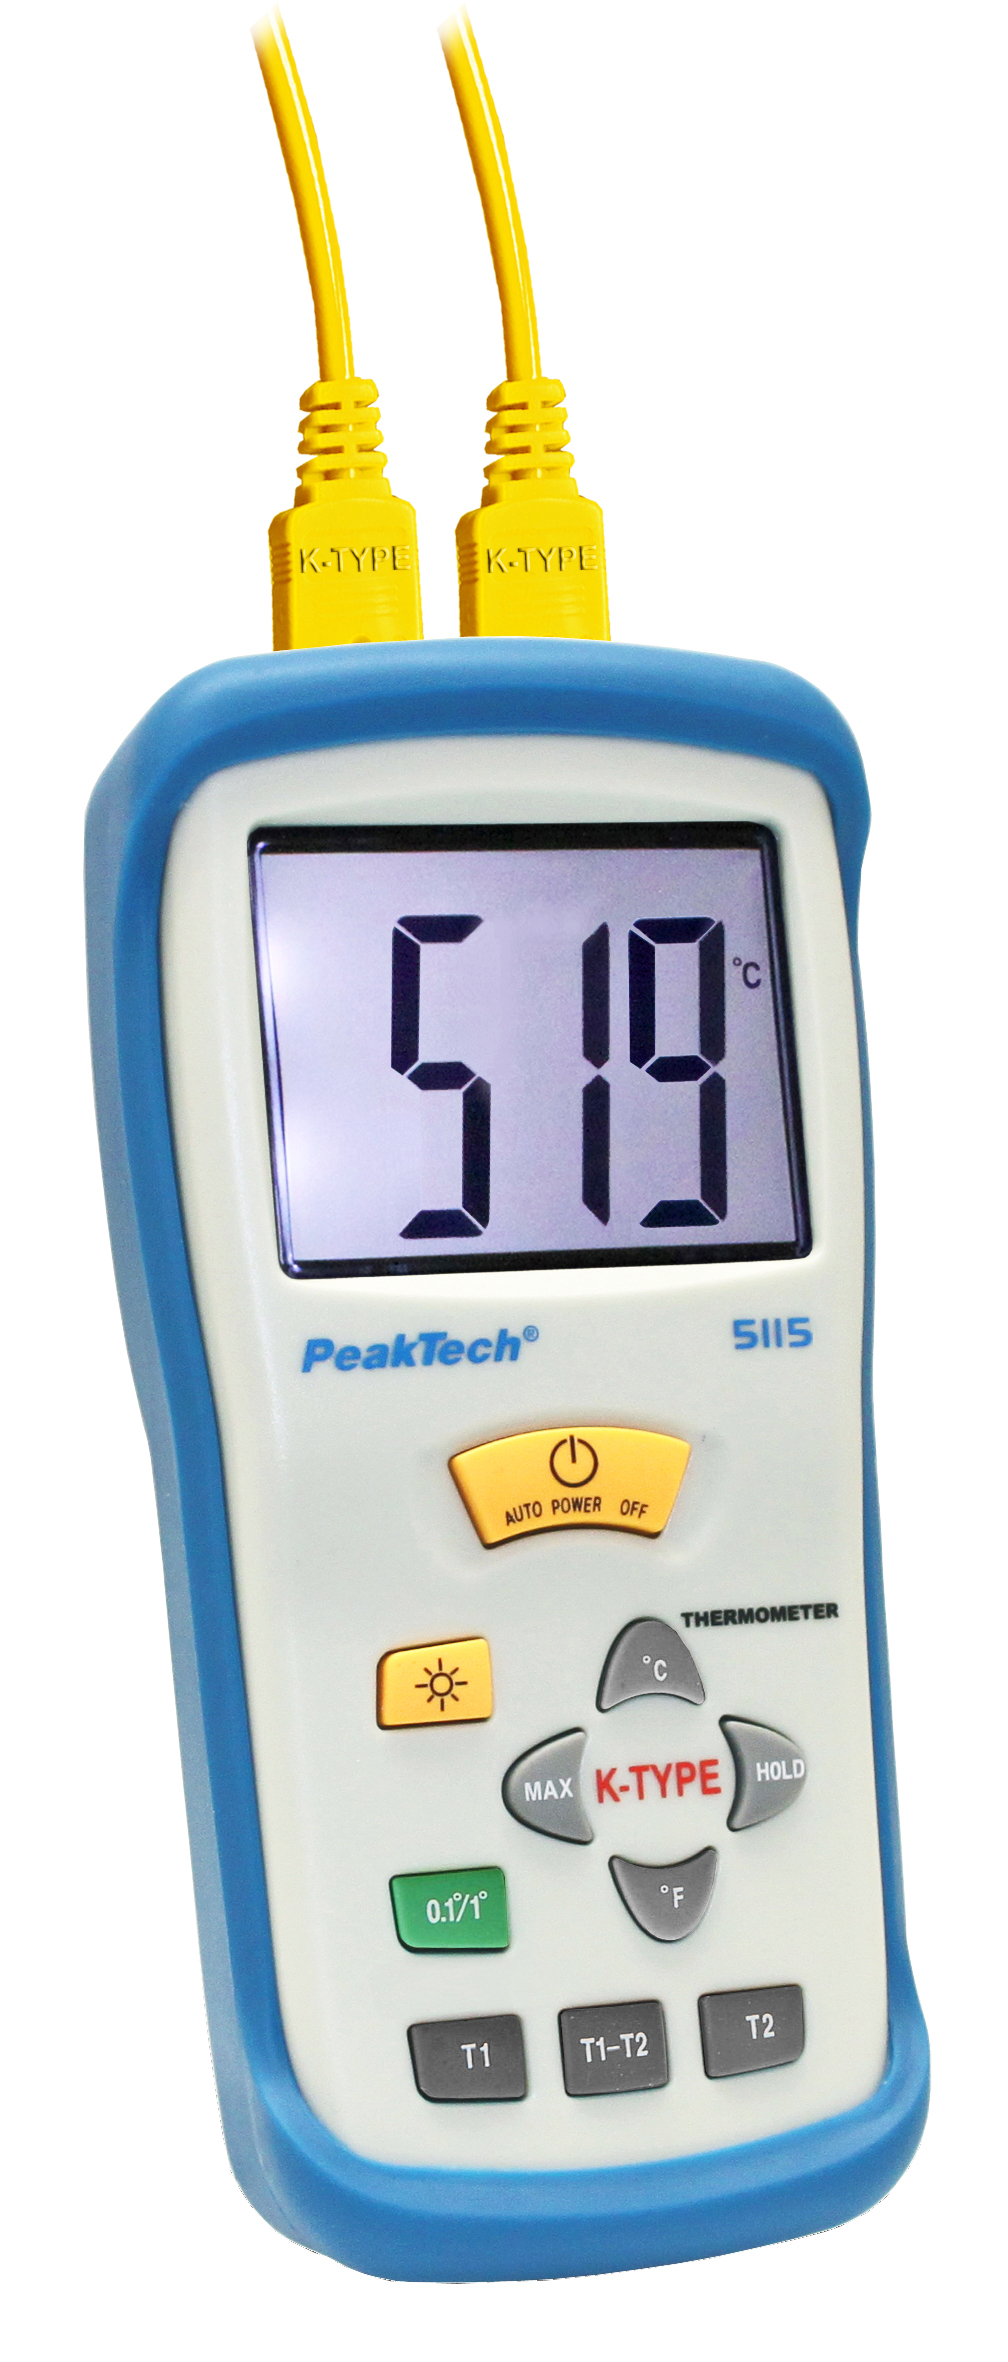 «PeakTech® P 5115» Digital-Thermometer K-Type / -50 ... +1300°C